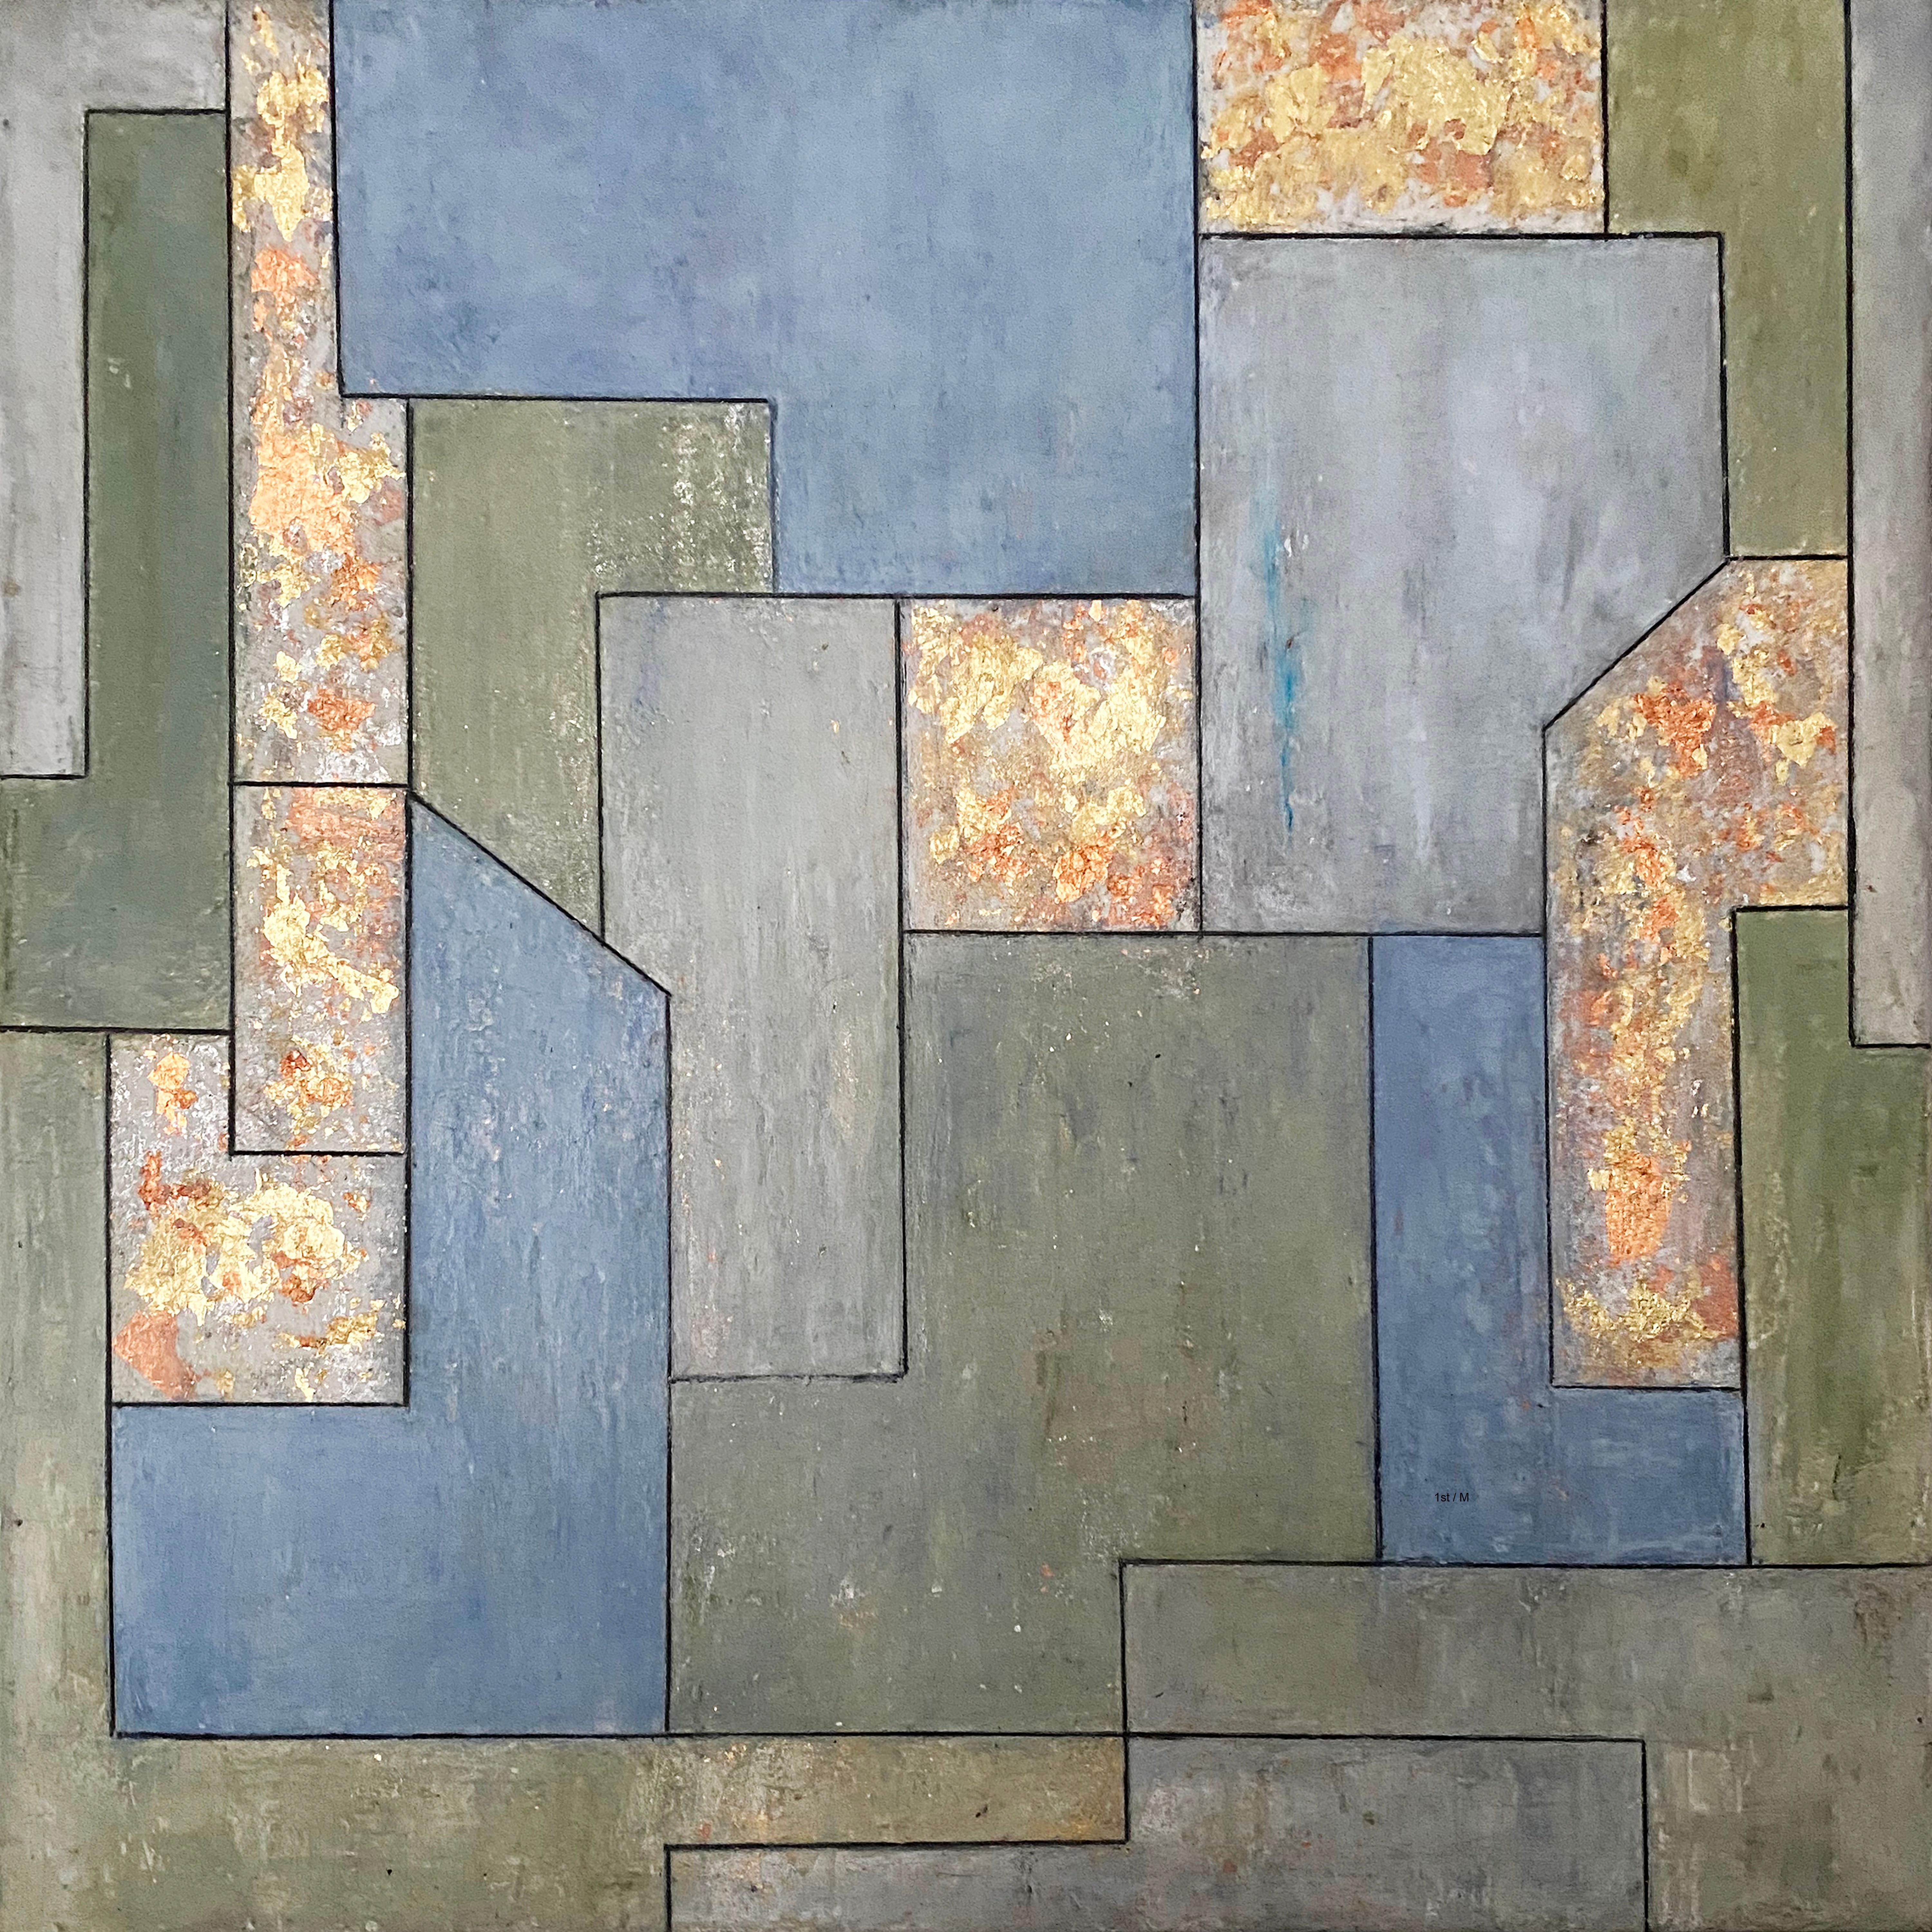 Stephen Cimini Abstract Painting - 22x22x2 in. - Oil, Gold Leaf - Geometric Architectural Contemporary, Precious